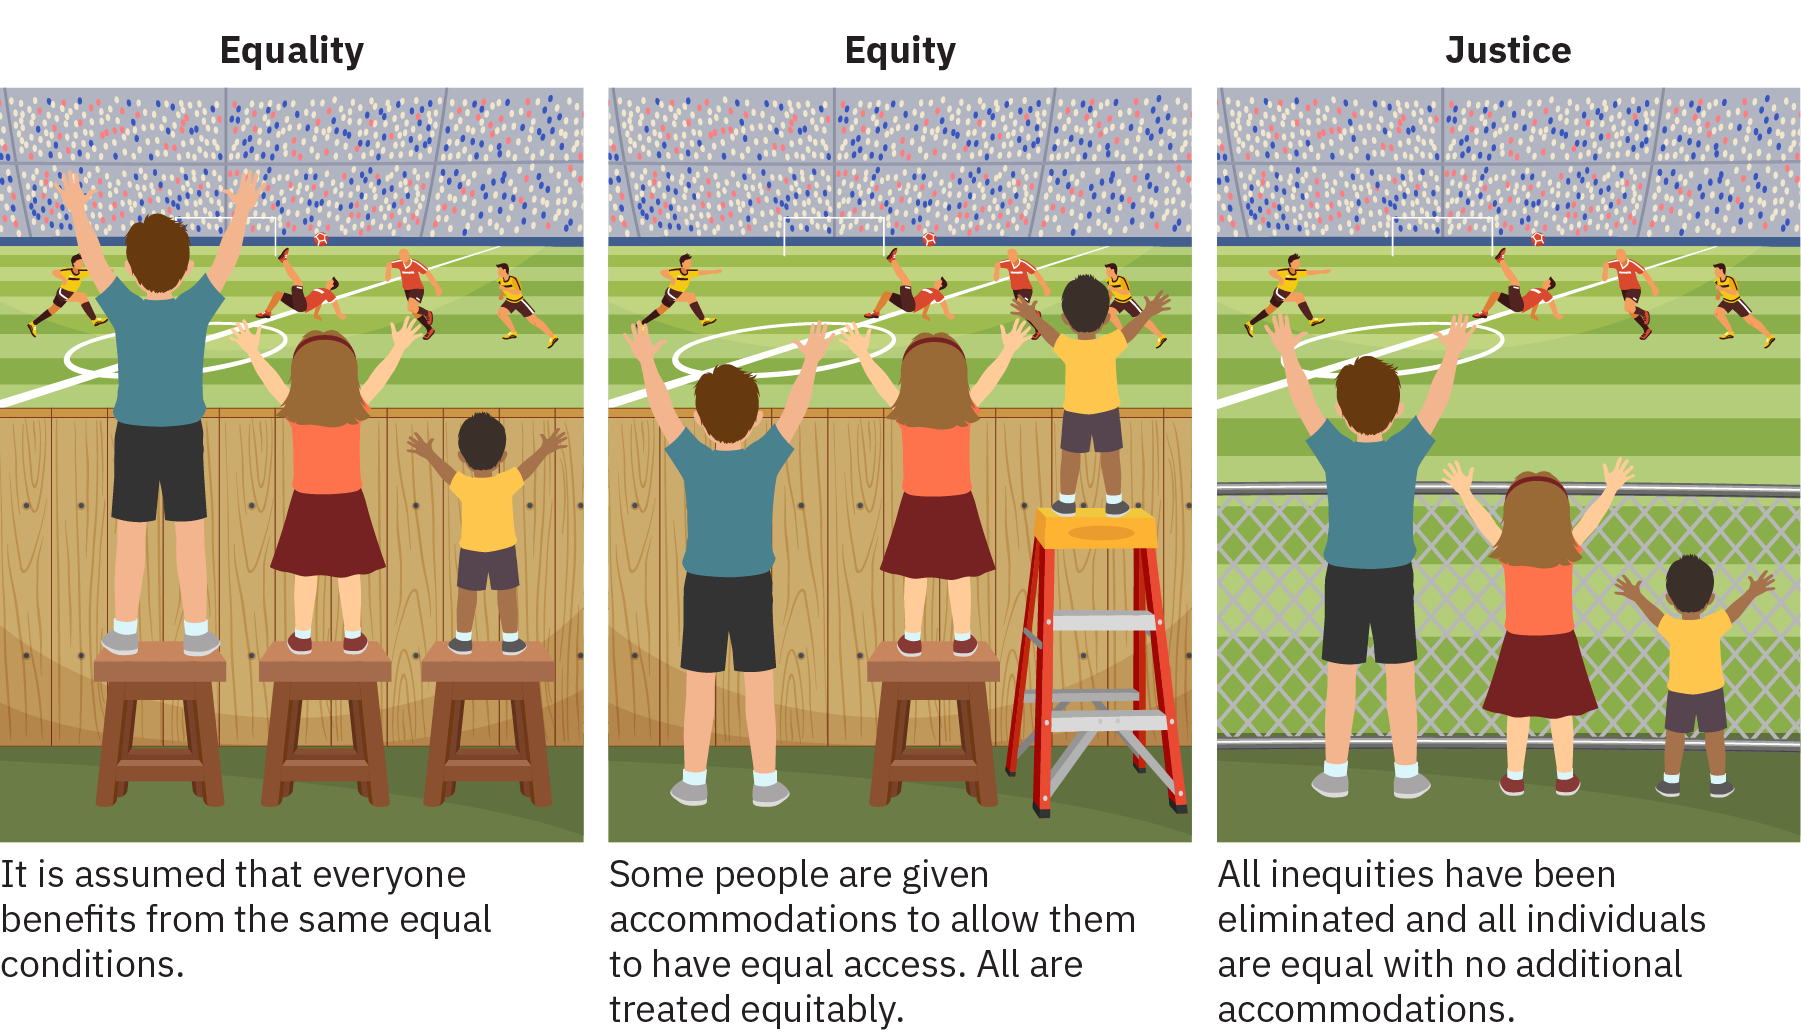 Three panels of text and images. 1) Panel one is labelled “Equality” and shows three children of varying height standing on benches of equal height behind a solid wooden fence. The tallest and second tallest child can easily see over the fence, but the shortest child cannot. 2) In panel two, labelled “Equity”, each child can see over the fence. The tallest child stands on the ground, the second tallest on a stool, and the shortest on a small ladder. 3) In panel three, labelled “Justice”, all three children stand in front of a chain link fence through which each can see without changing their elevation.